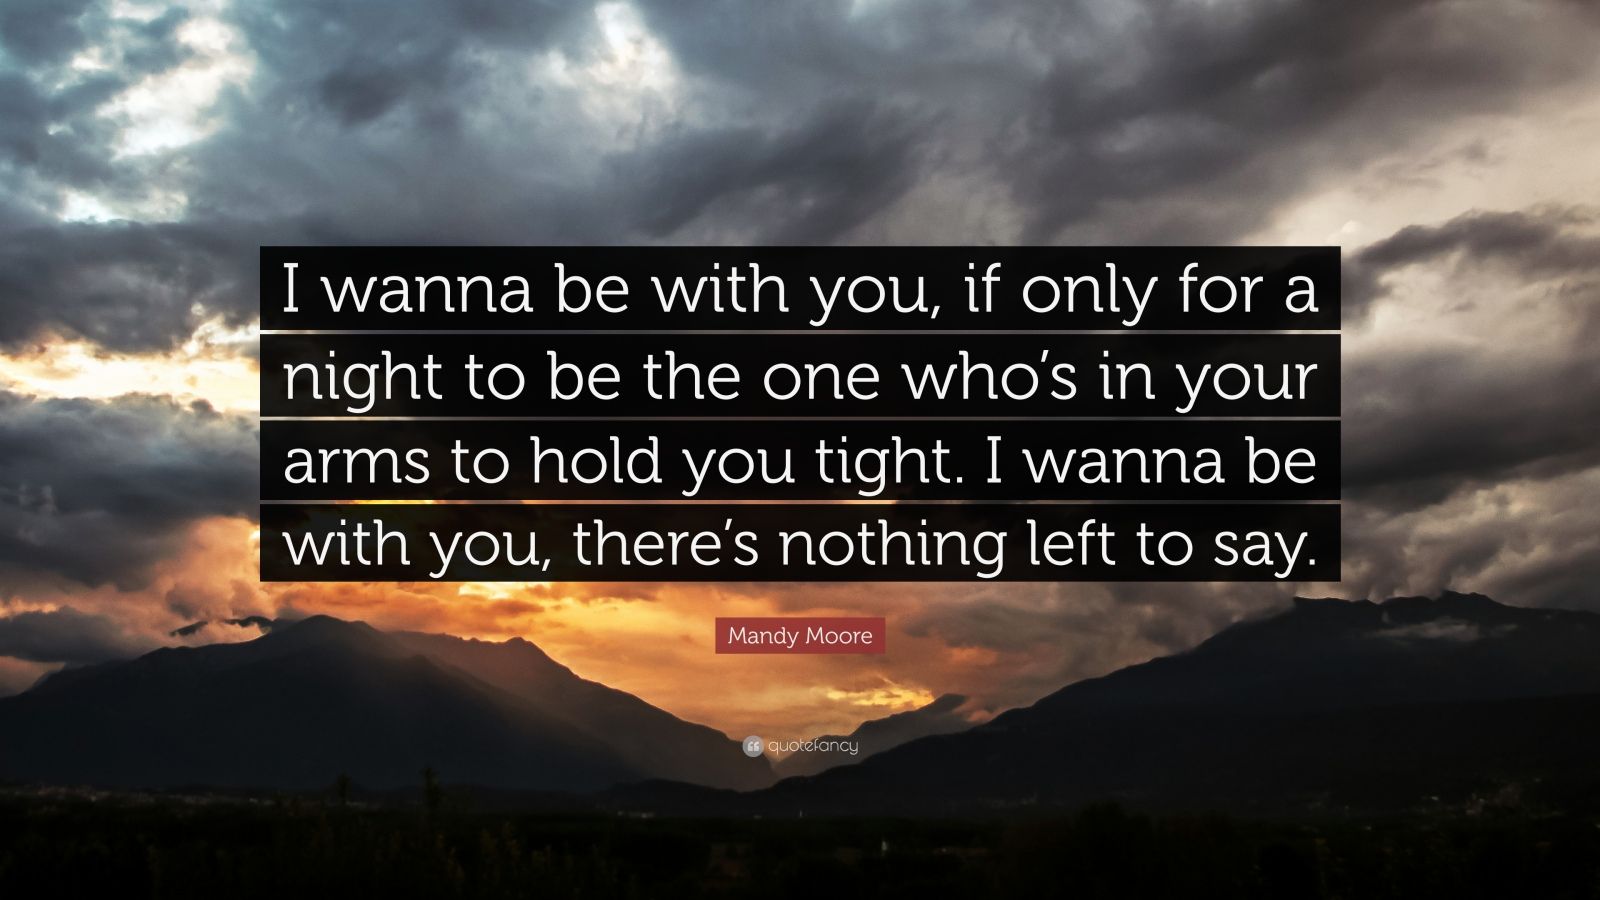 Mandy Moore Quote I Wanna Be With You If Only For A Night To Be The One Who S In Your Arms To Hold You Tight I Wanna Be With You There